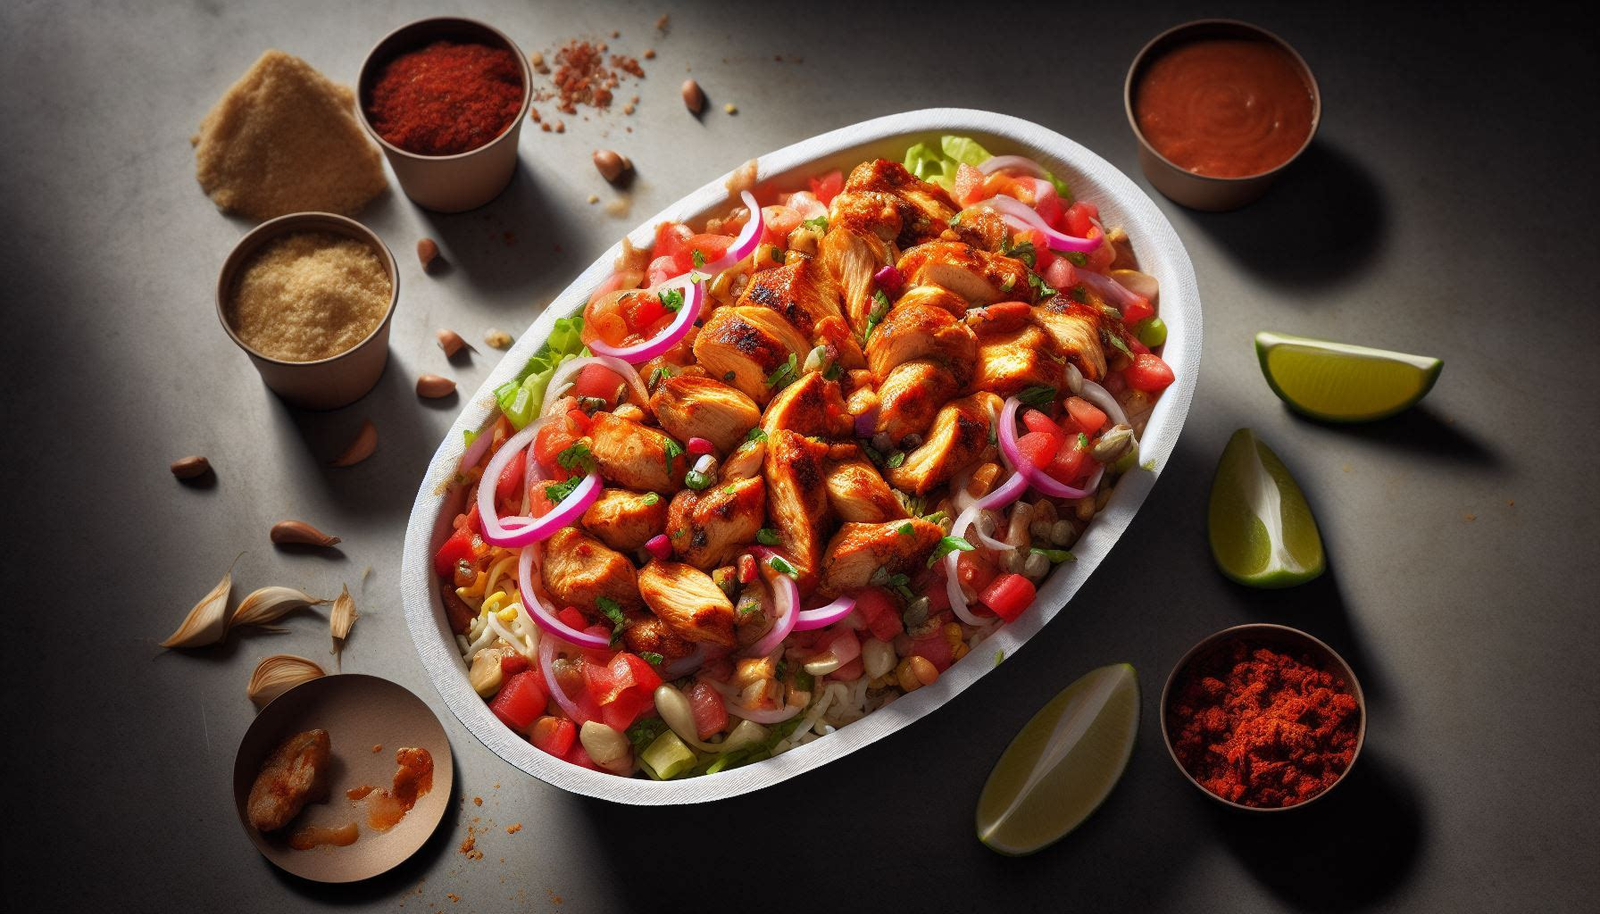 CHICKEN AL PASTOR IS BACK CHIPOTLE REINTRODUCES ONE OF ITS MOST POPULAR MENU INNOVATIONS